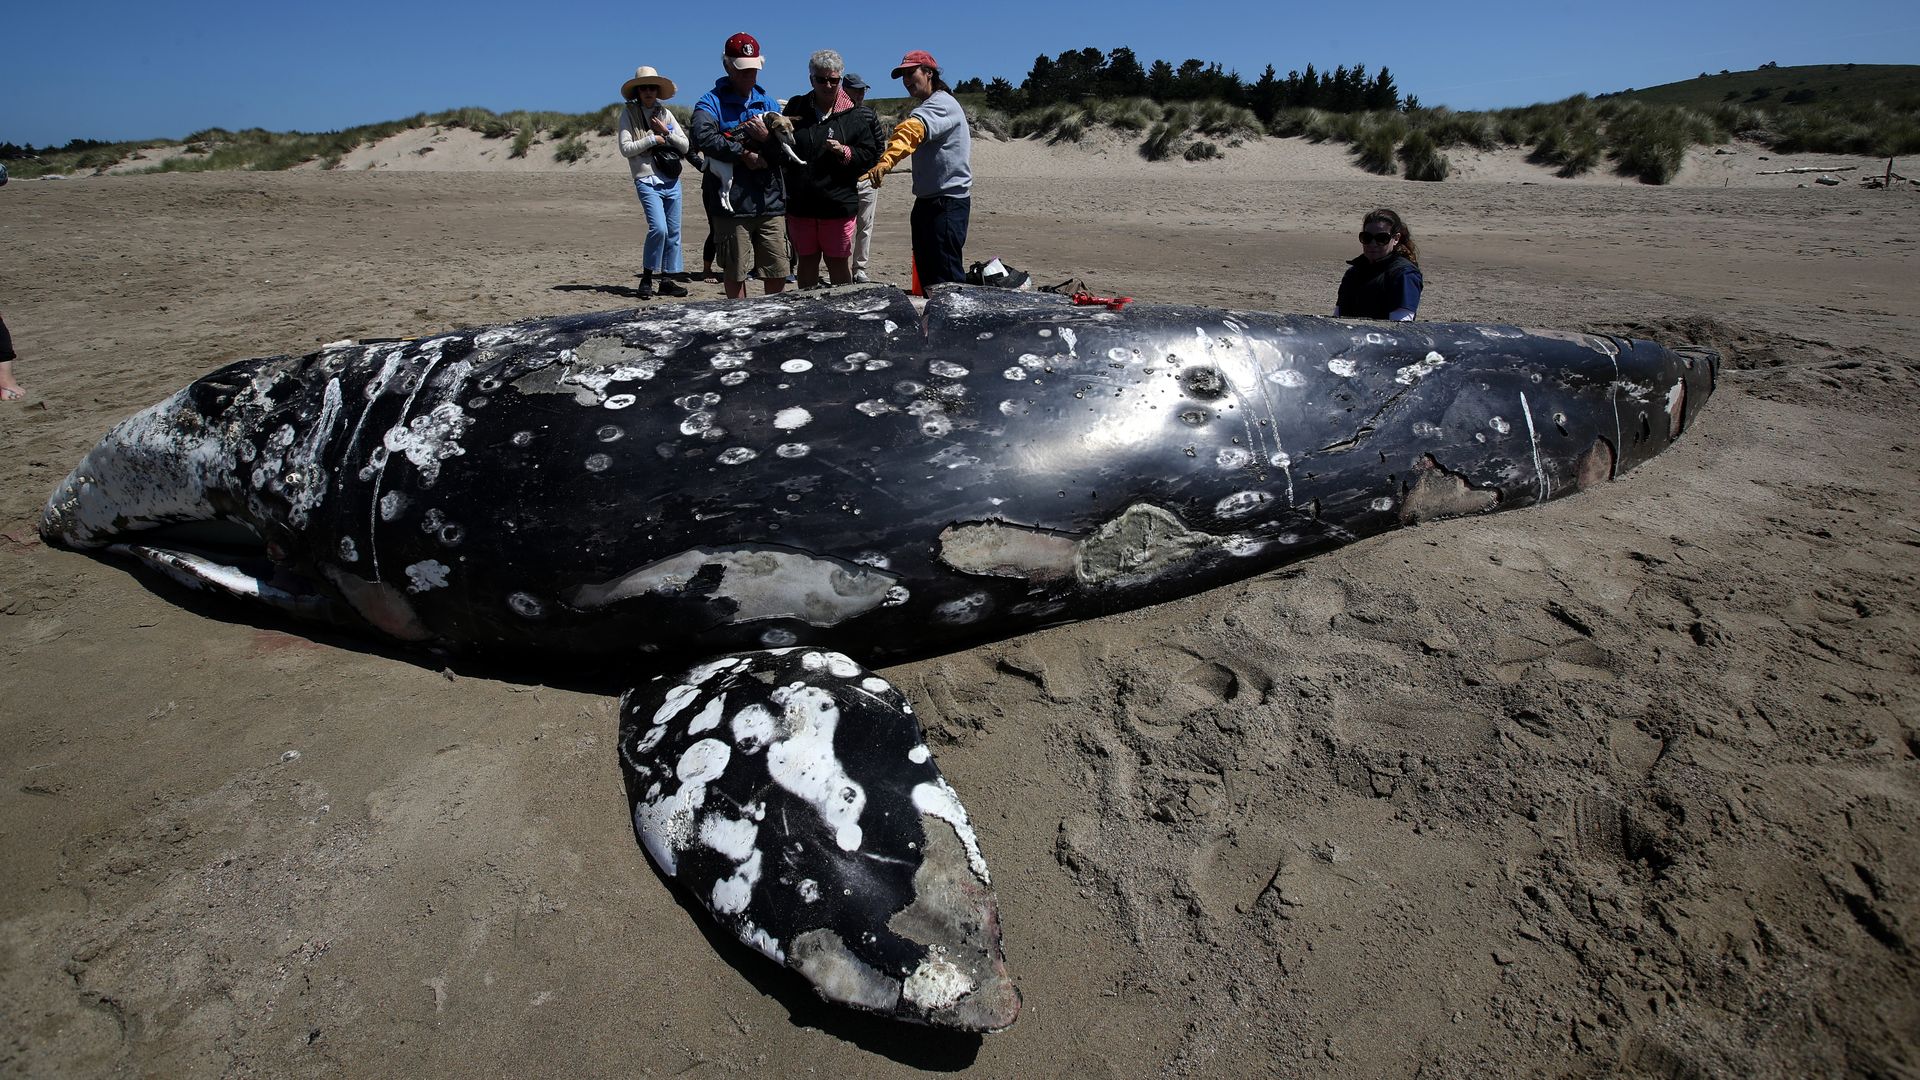 In this image, a crowd stands around a large dead whale on a beach.